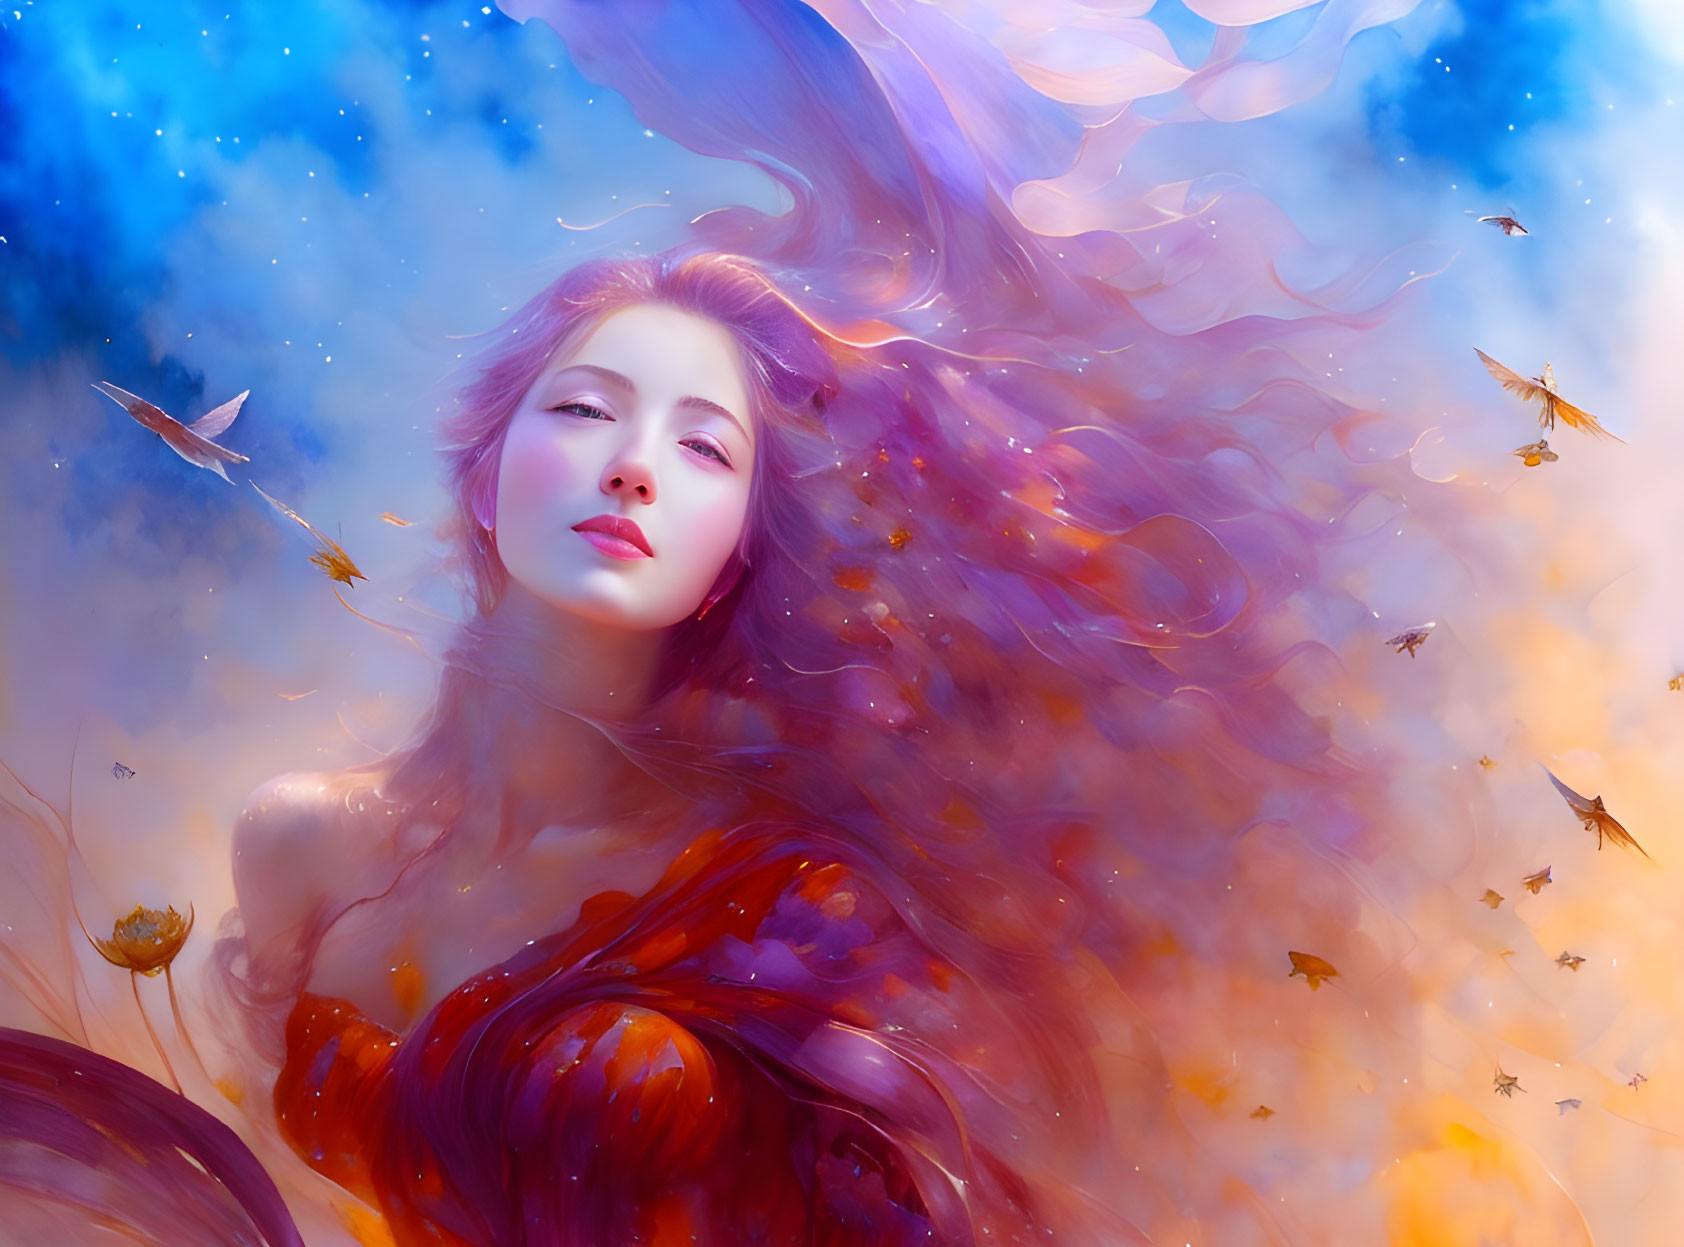 Vibrant red-haired woman in fantastical blue setting with golden leaves